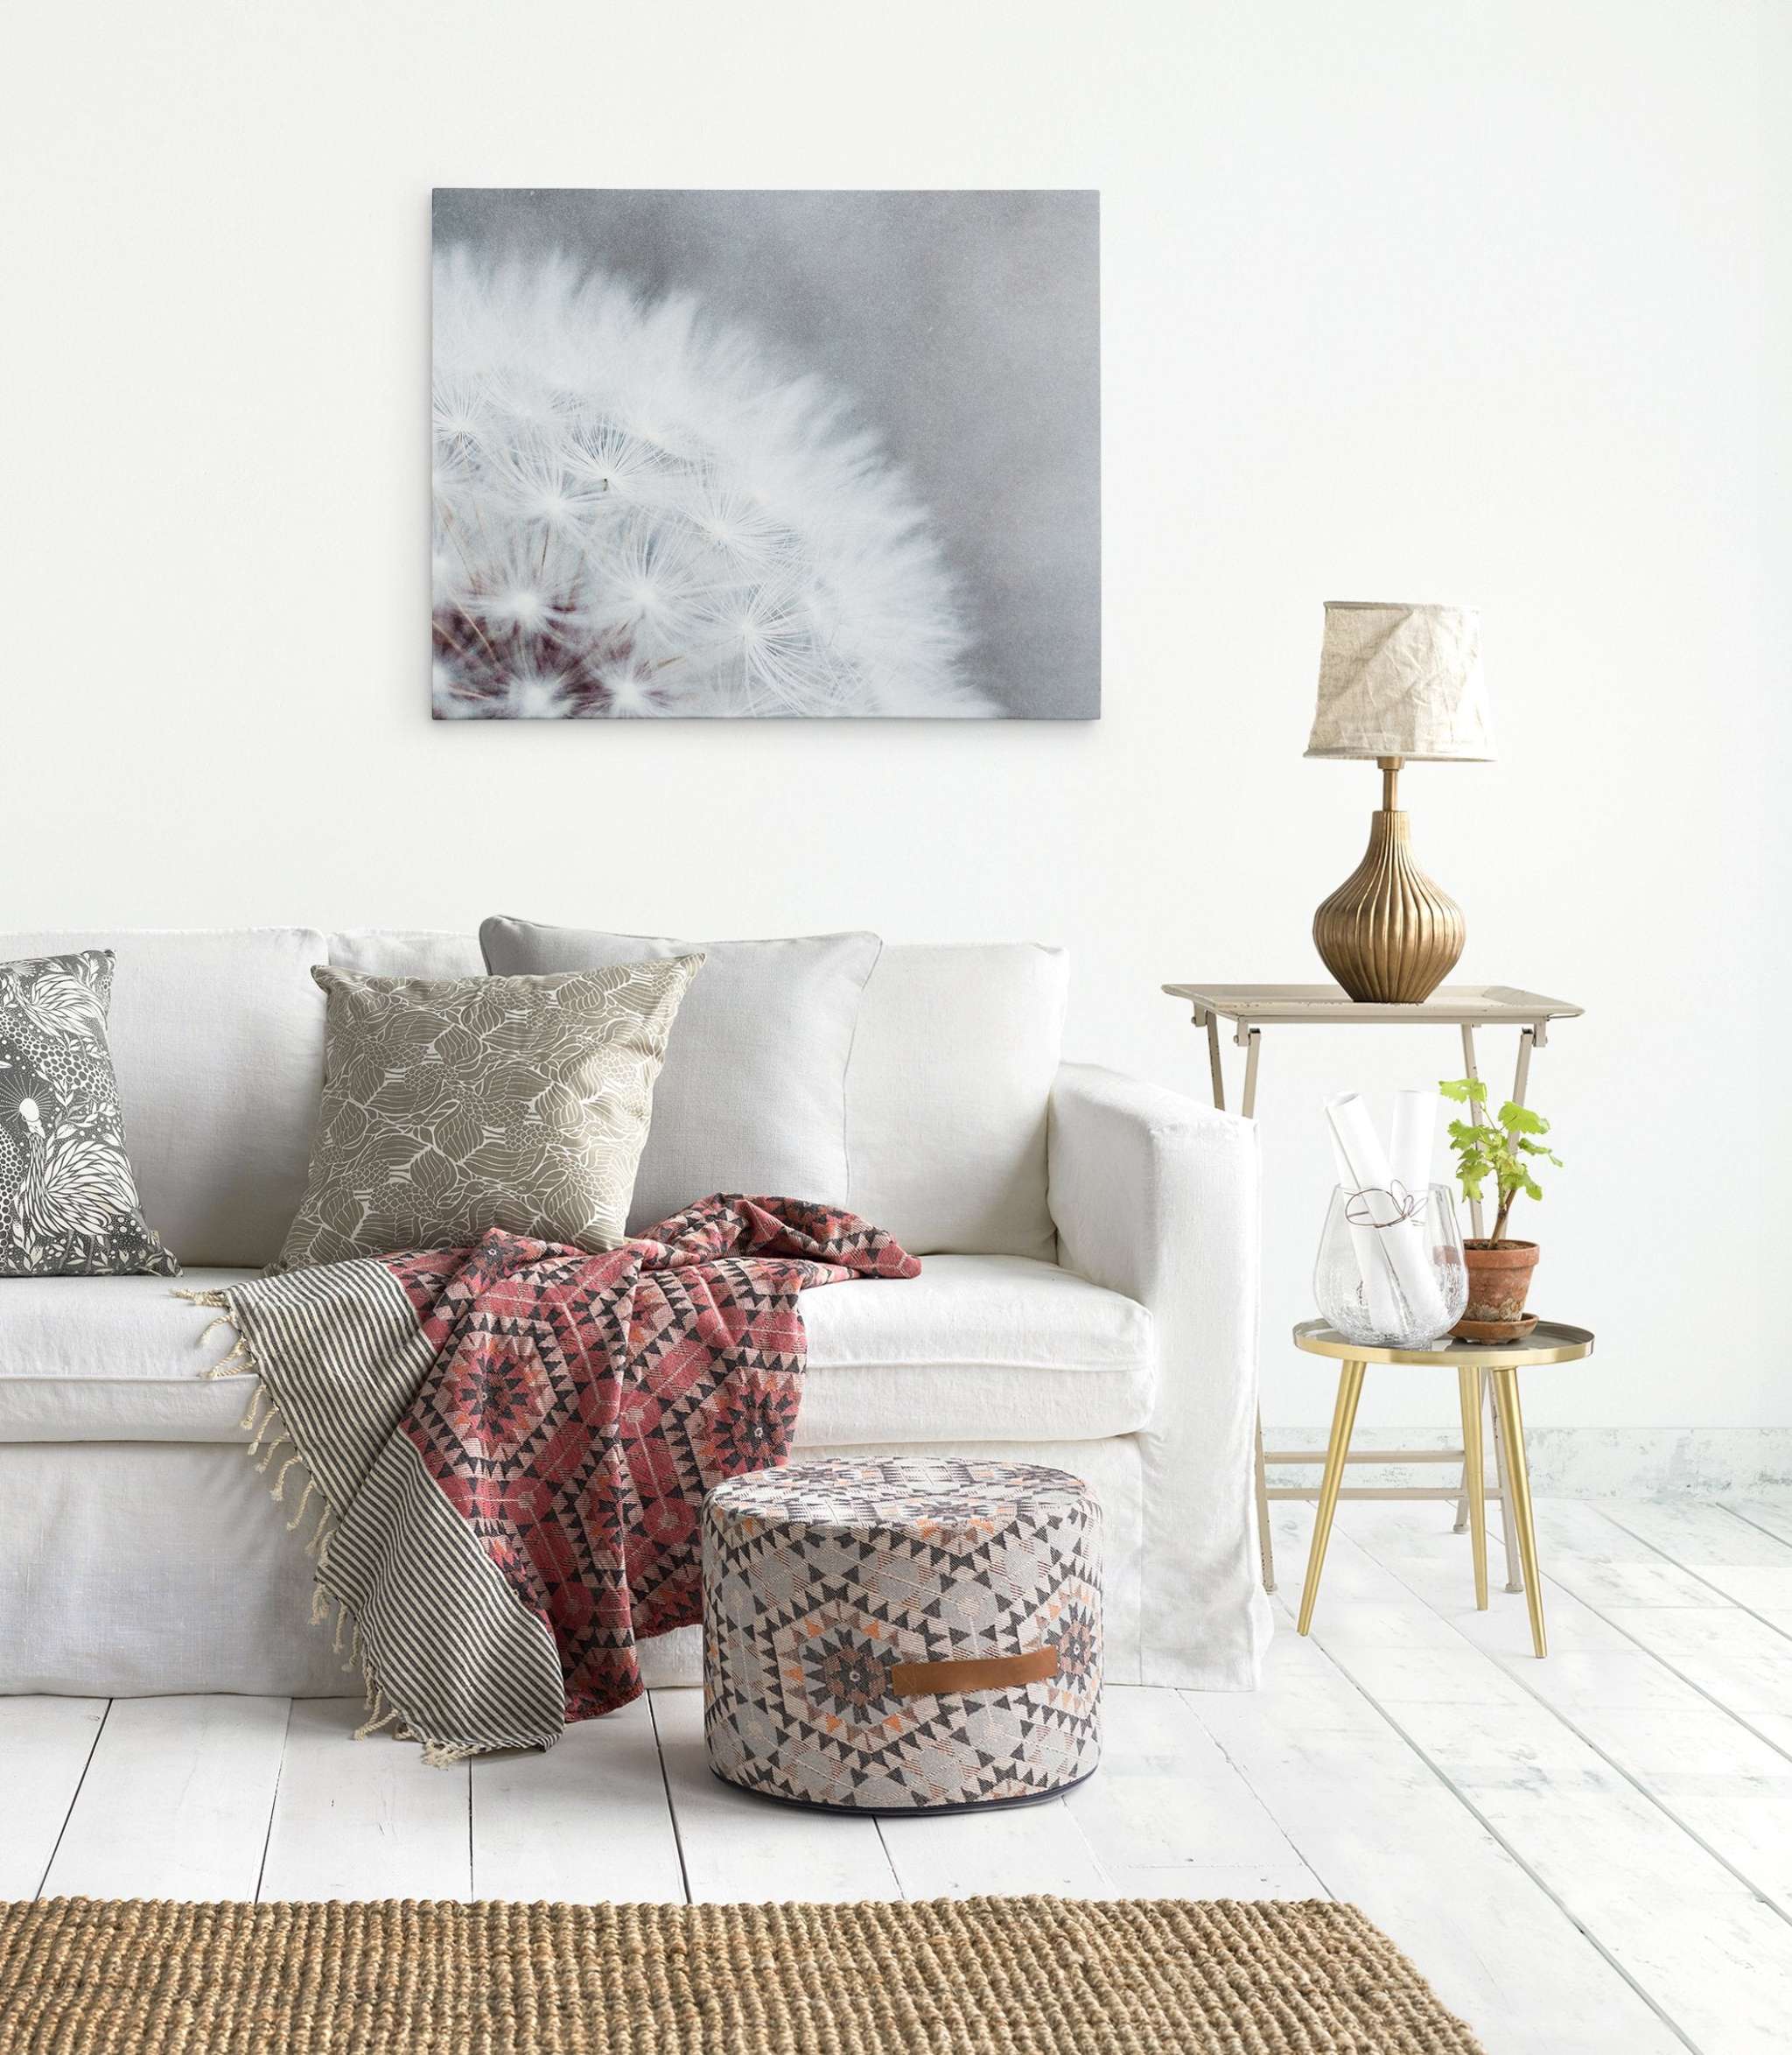 A light and airy living room features a white sofa adorned with patterned throw pillows and a red and orange blanket. Next to the sofa is a small side table with a lamp, a plant, and a glass jug. A pouf sits on the wooden floor, and above, an exquisite dandelion art piece on premium artist-grade canvas hangs on the white wall: the Grey Botanical Canvas Wall Art, 'Dandelion Queen' by Offley Green.